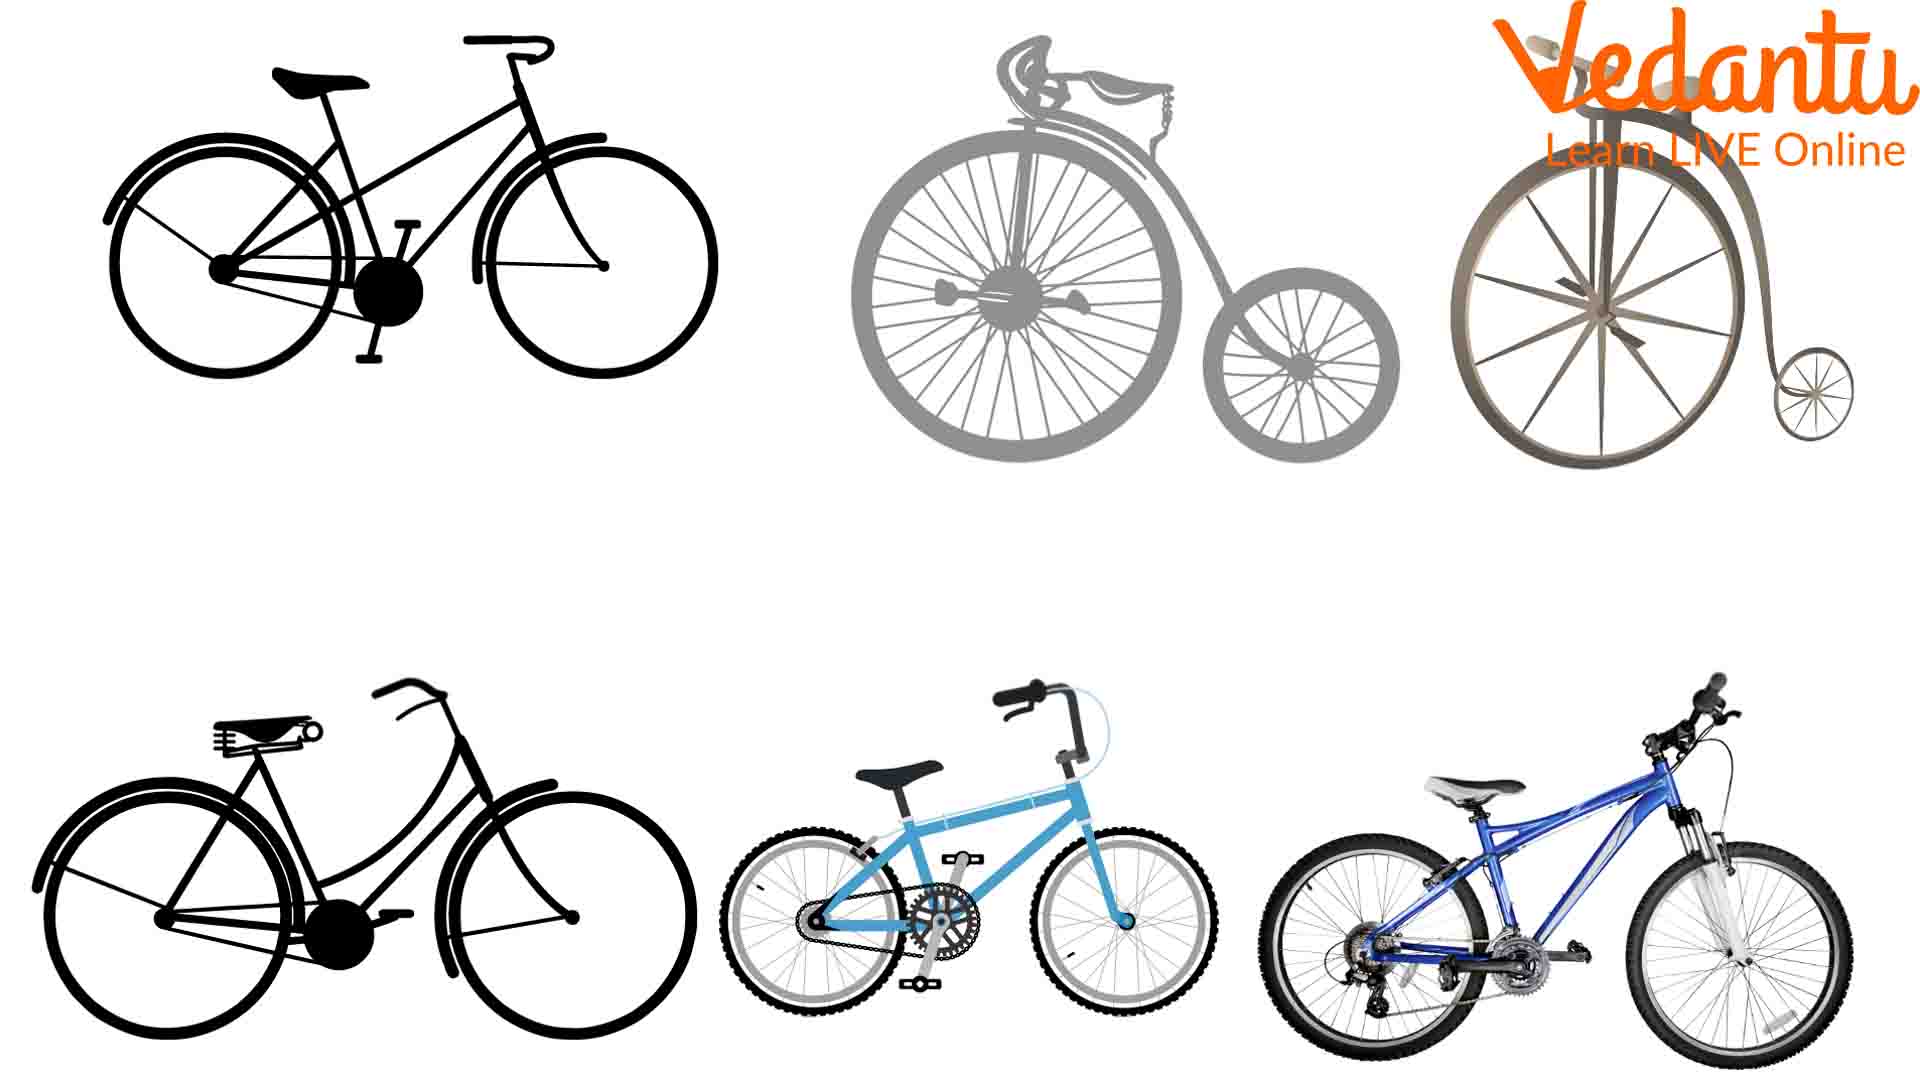 Evolution of bicycle